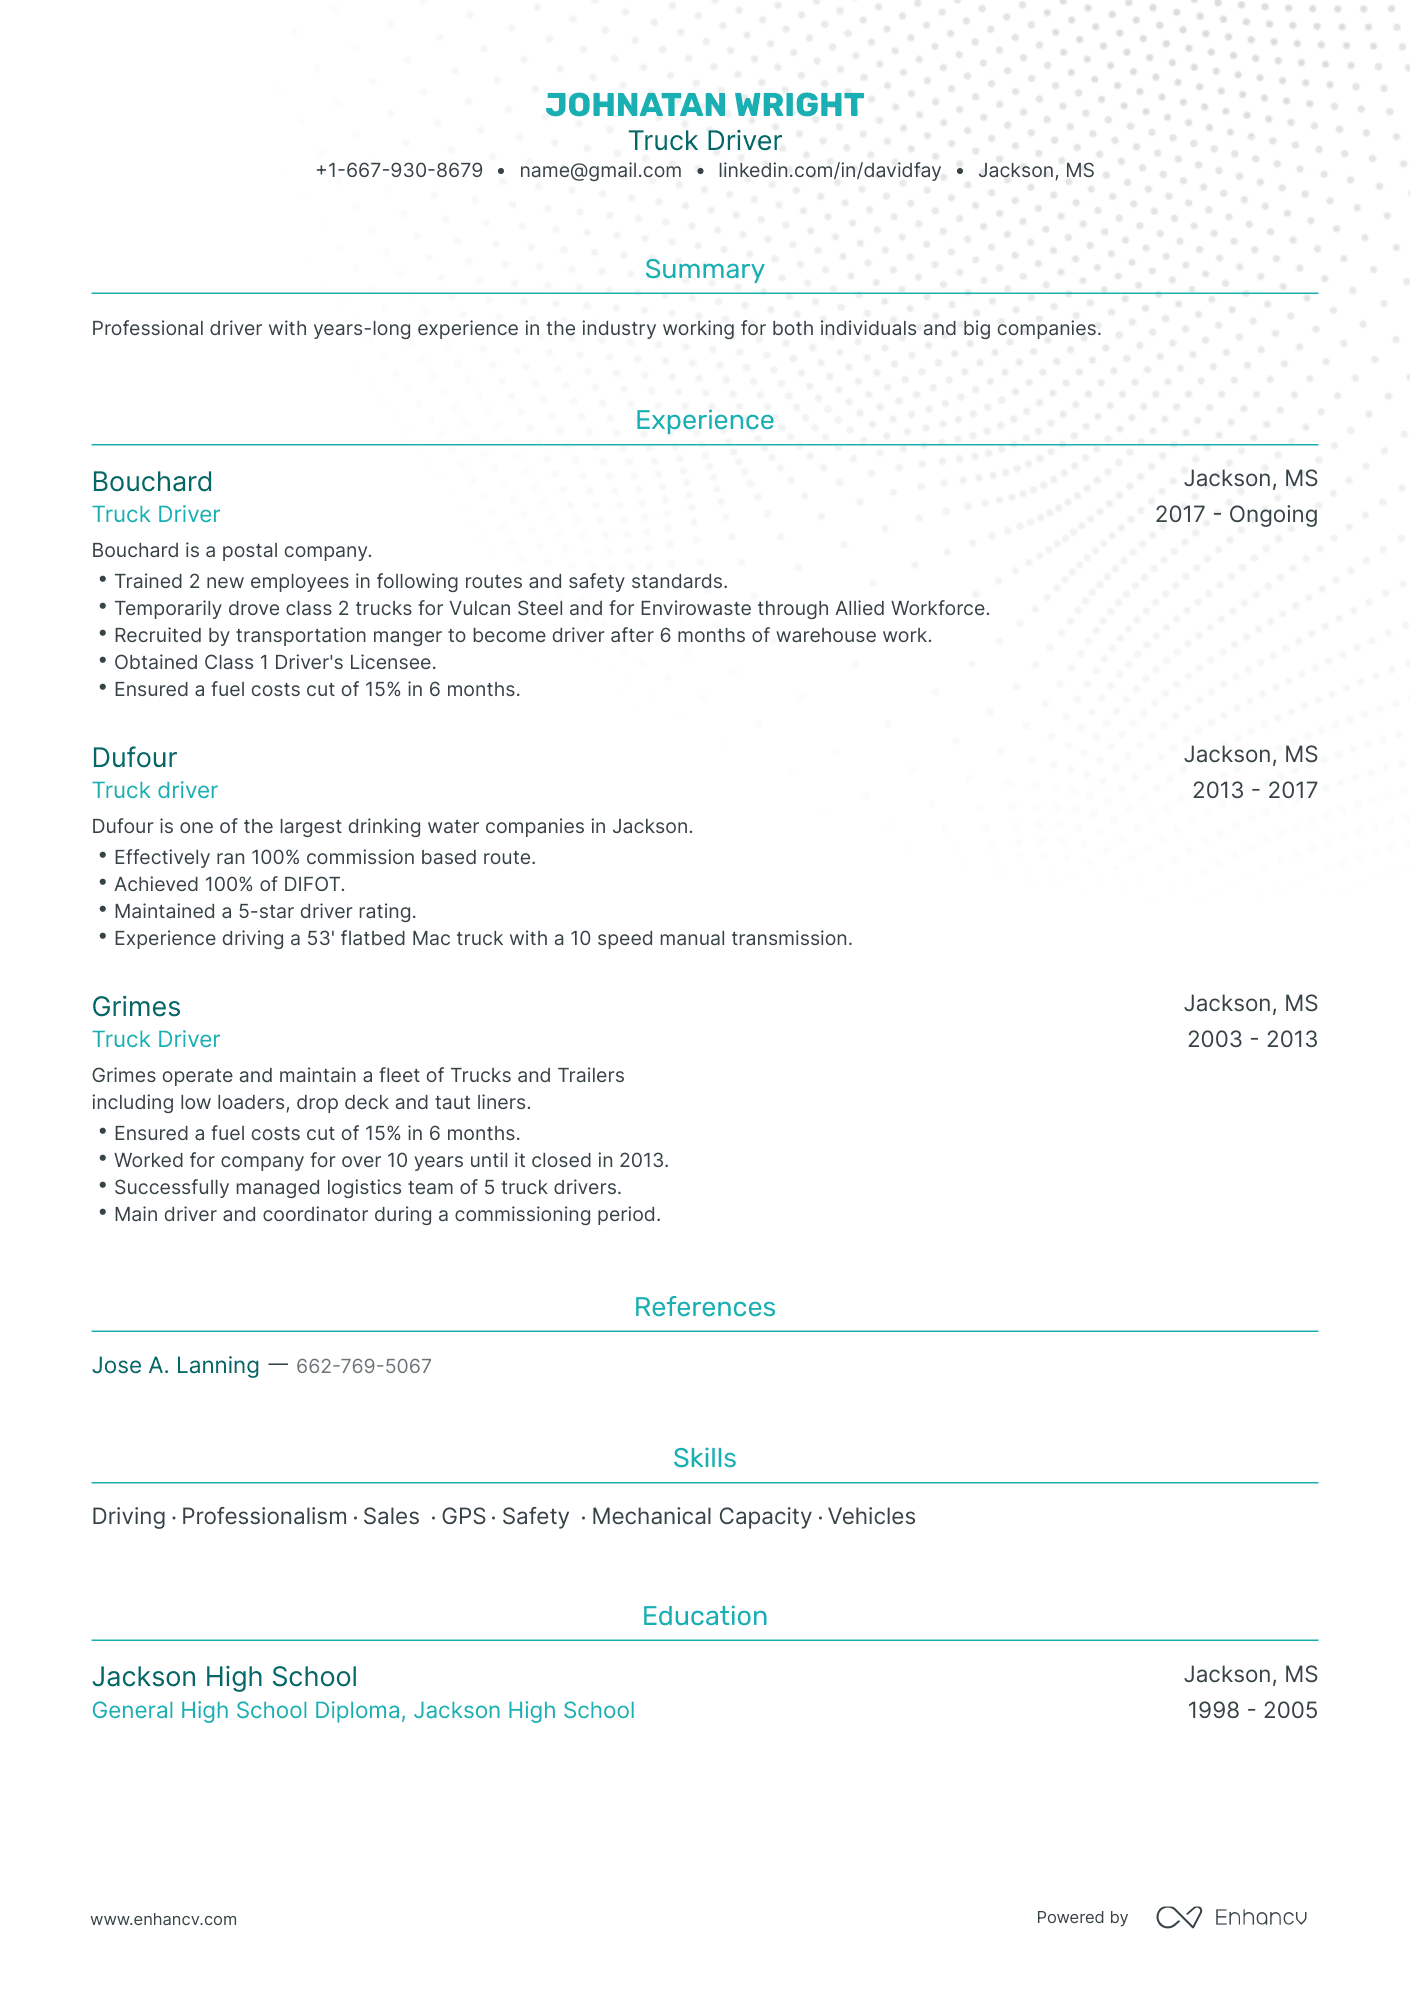 Traditional Truck Driver Resume Template